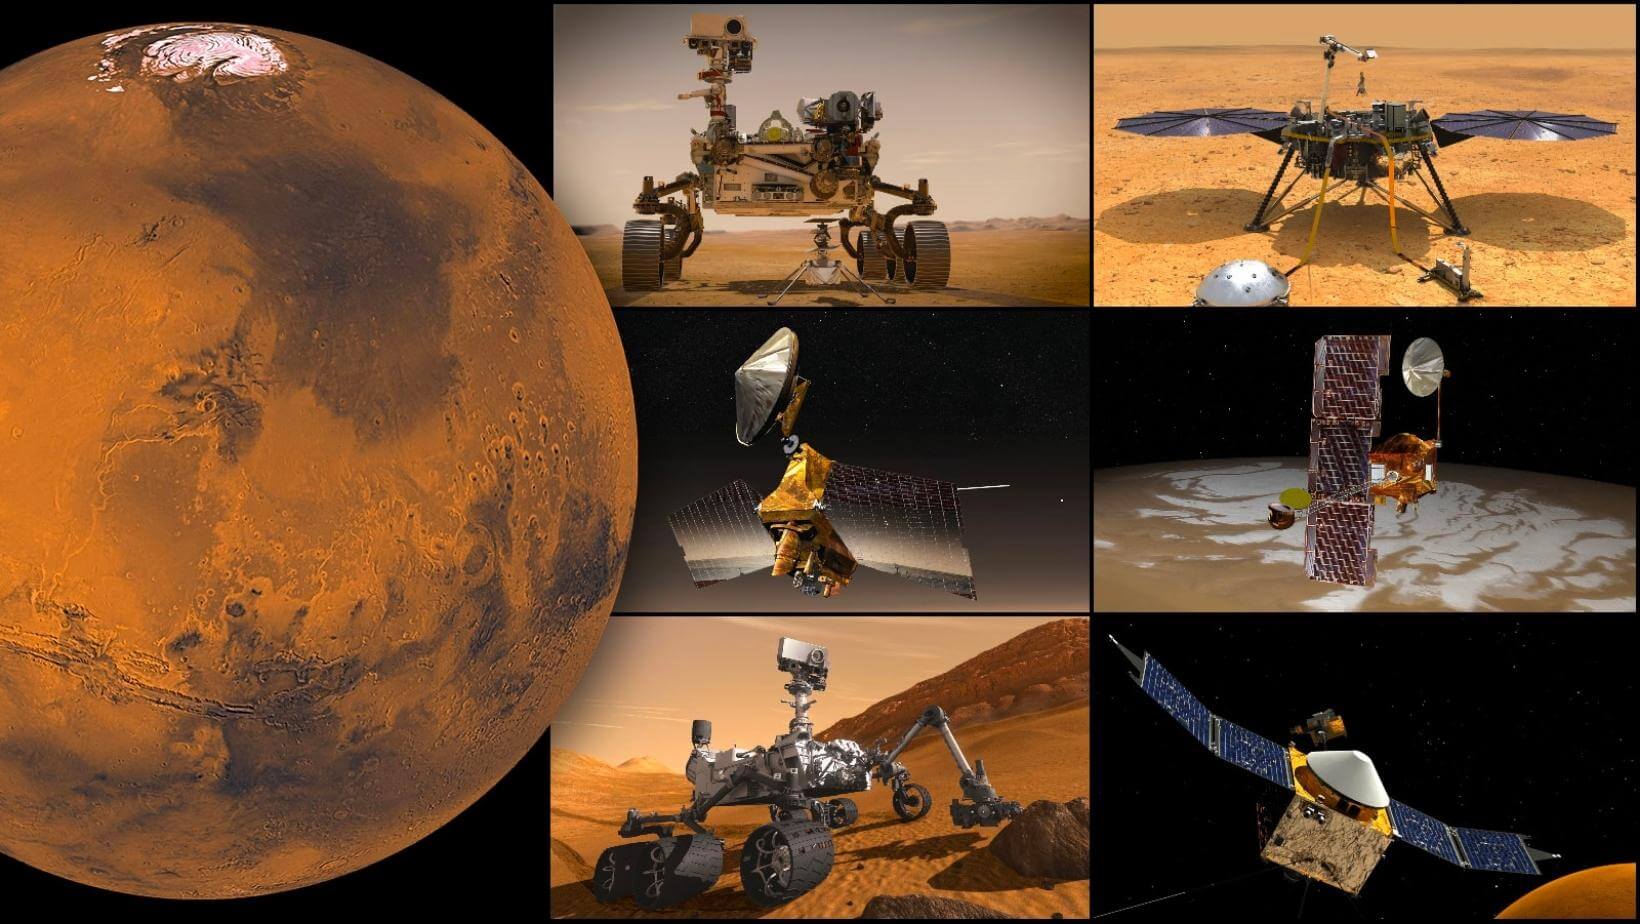 An illustration of NASA's all missions to mars